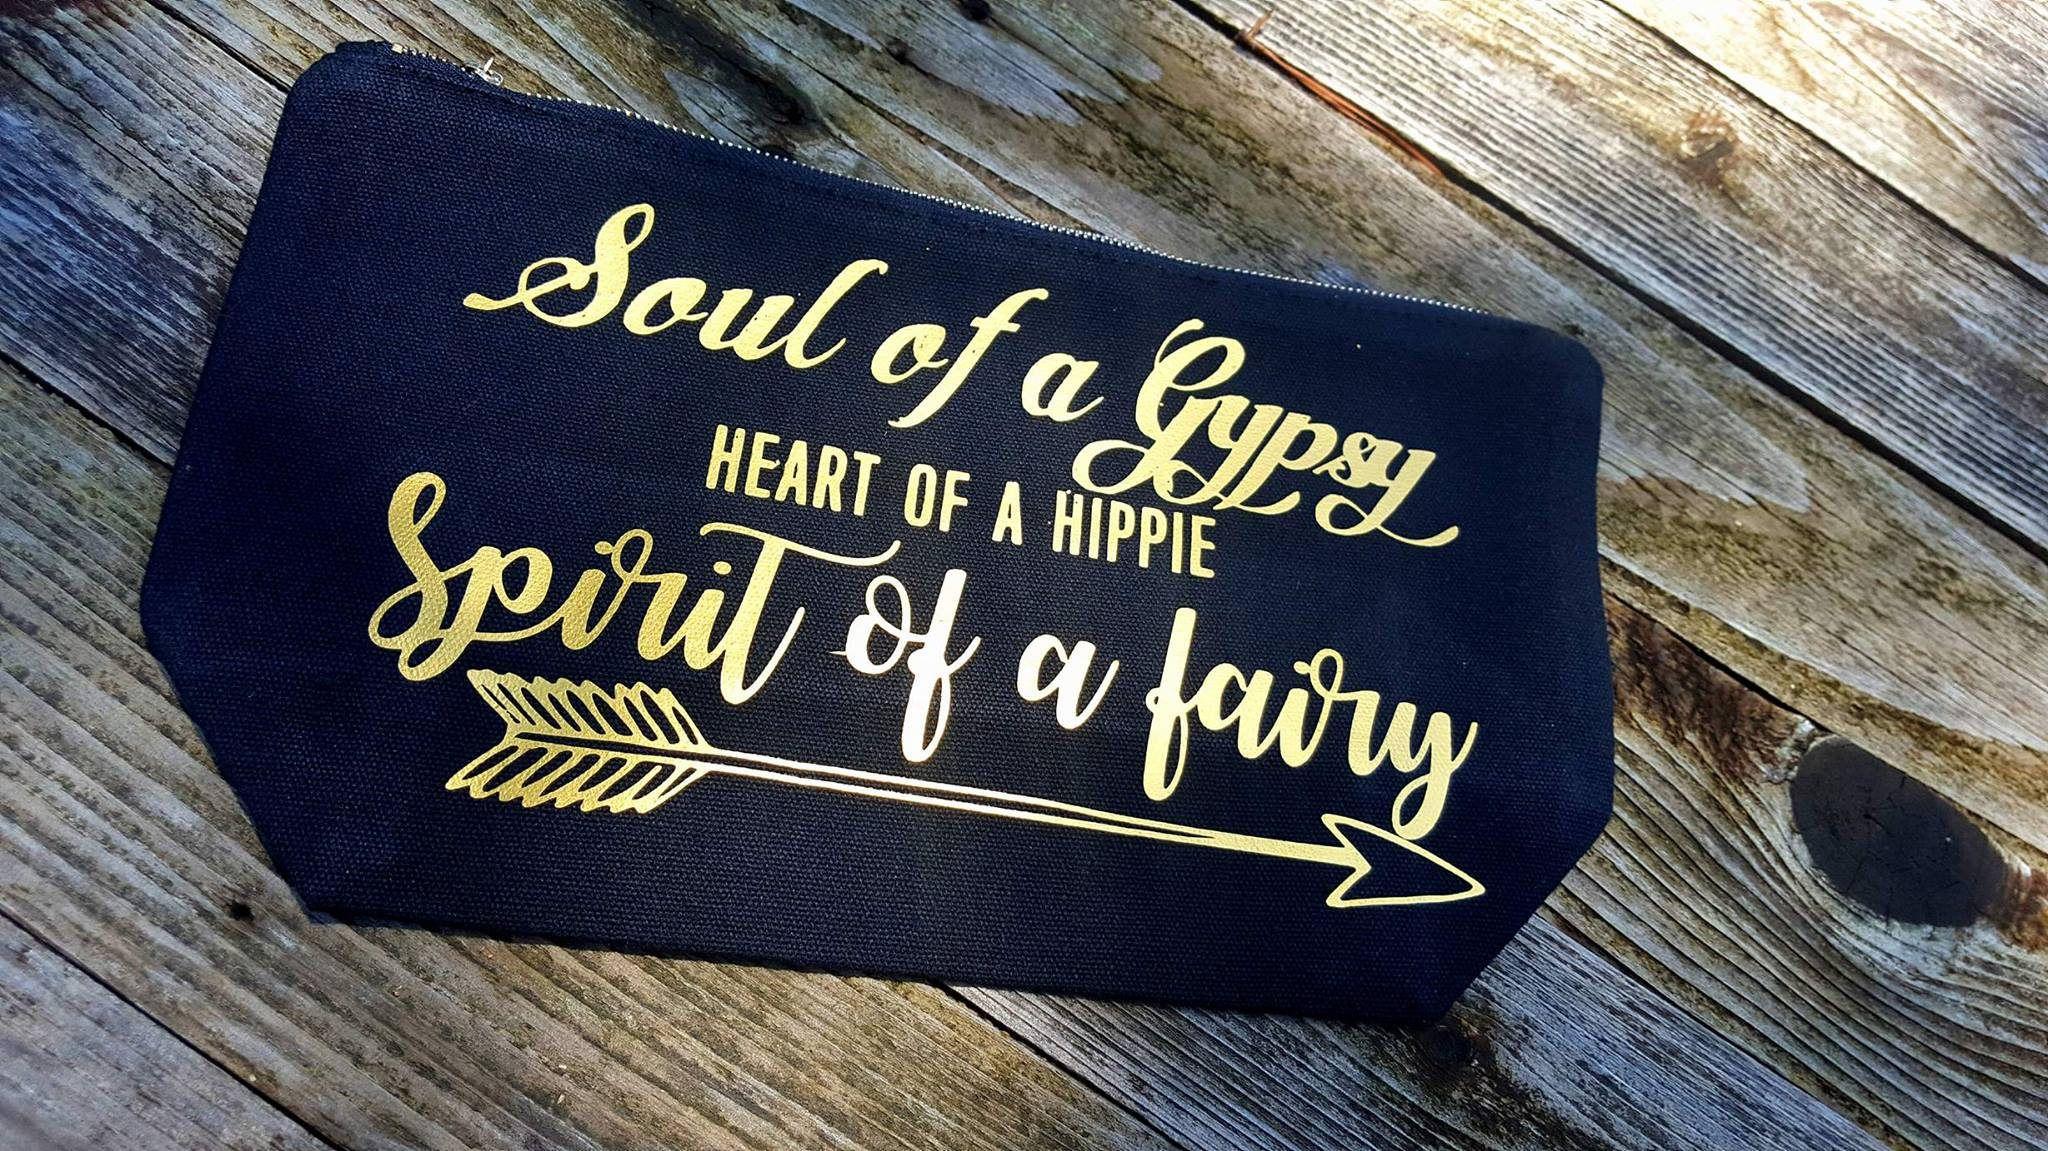 Hippie Spirit Logo - Soul of a gypsy heart of a hippie spirit of a fairy Large Makeup Bag